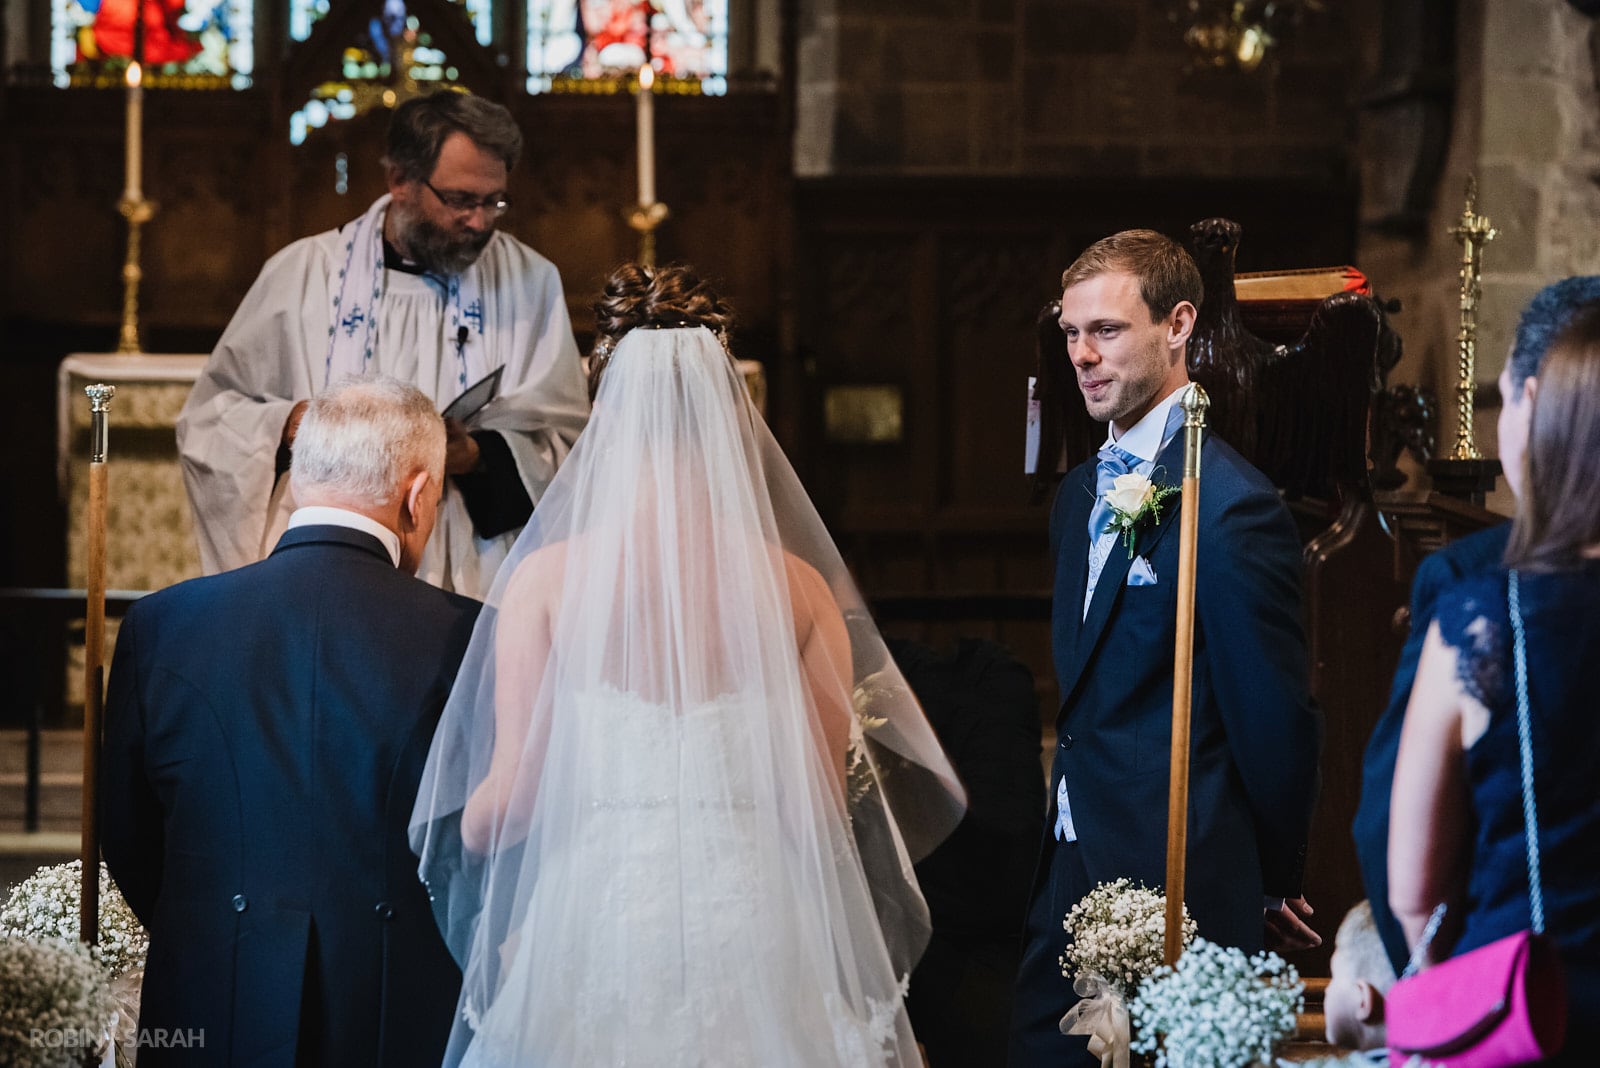 Groom sees bride in her wedding dress as she arrives in church